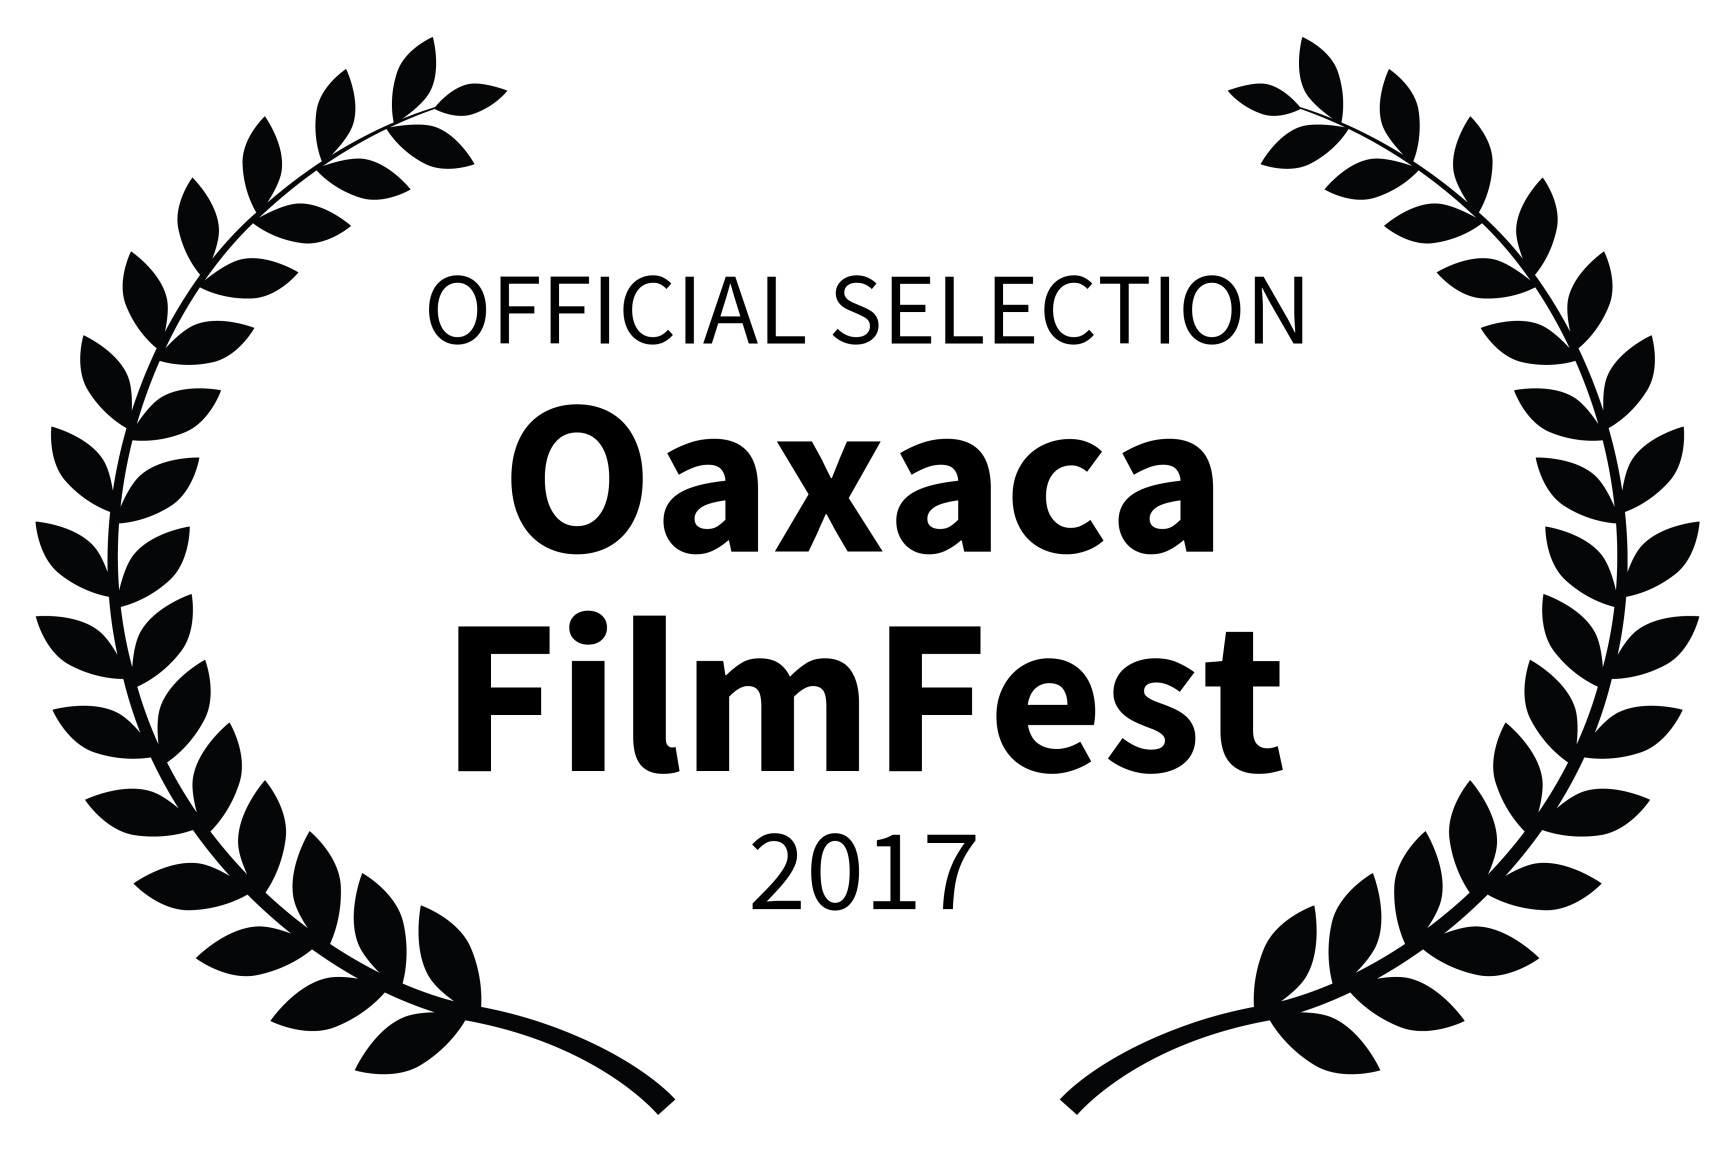 Official Selection 2017